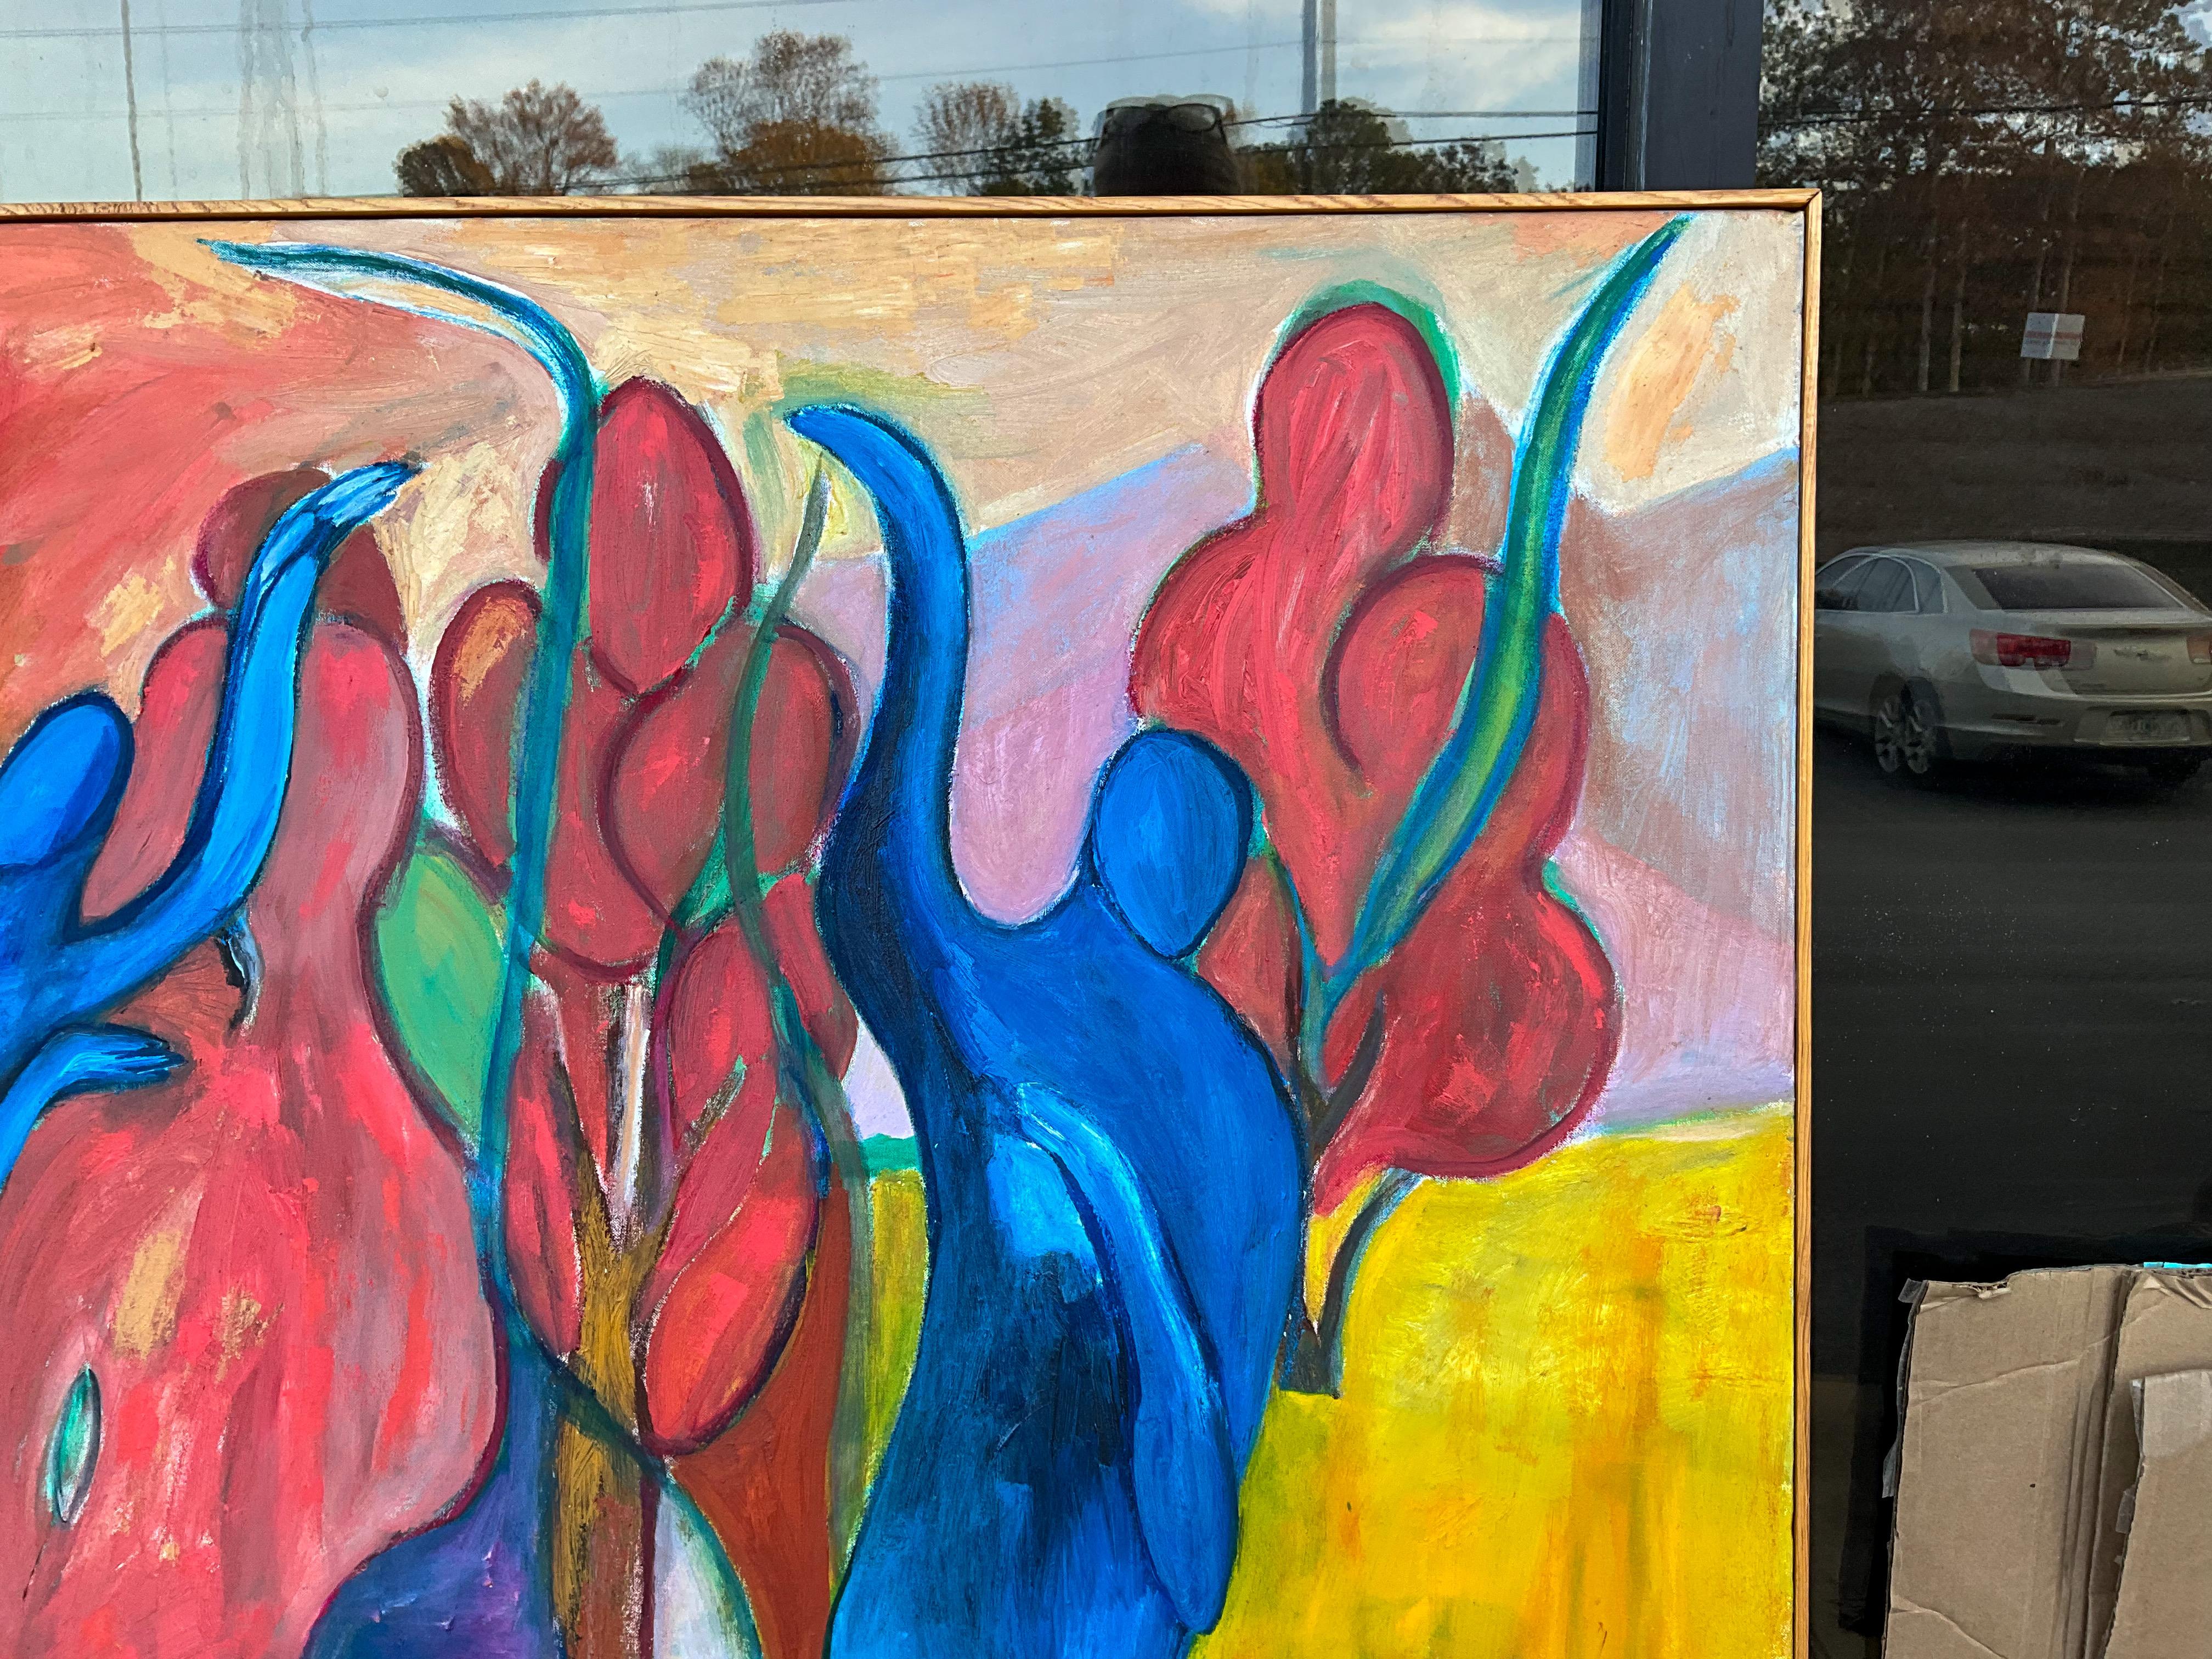 This is a large scale signed oil on canvas with a modern interpretation of the relationship between Adam and Eve. The vivid colors virtually dance off of the canvas! The artist is Michael R. Johnson, 1992. It is in very good condition. 

My